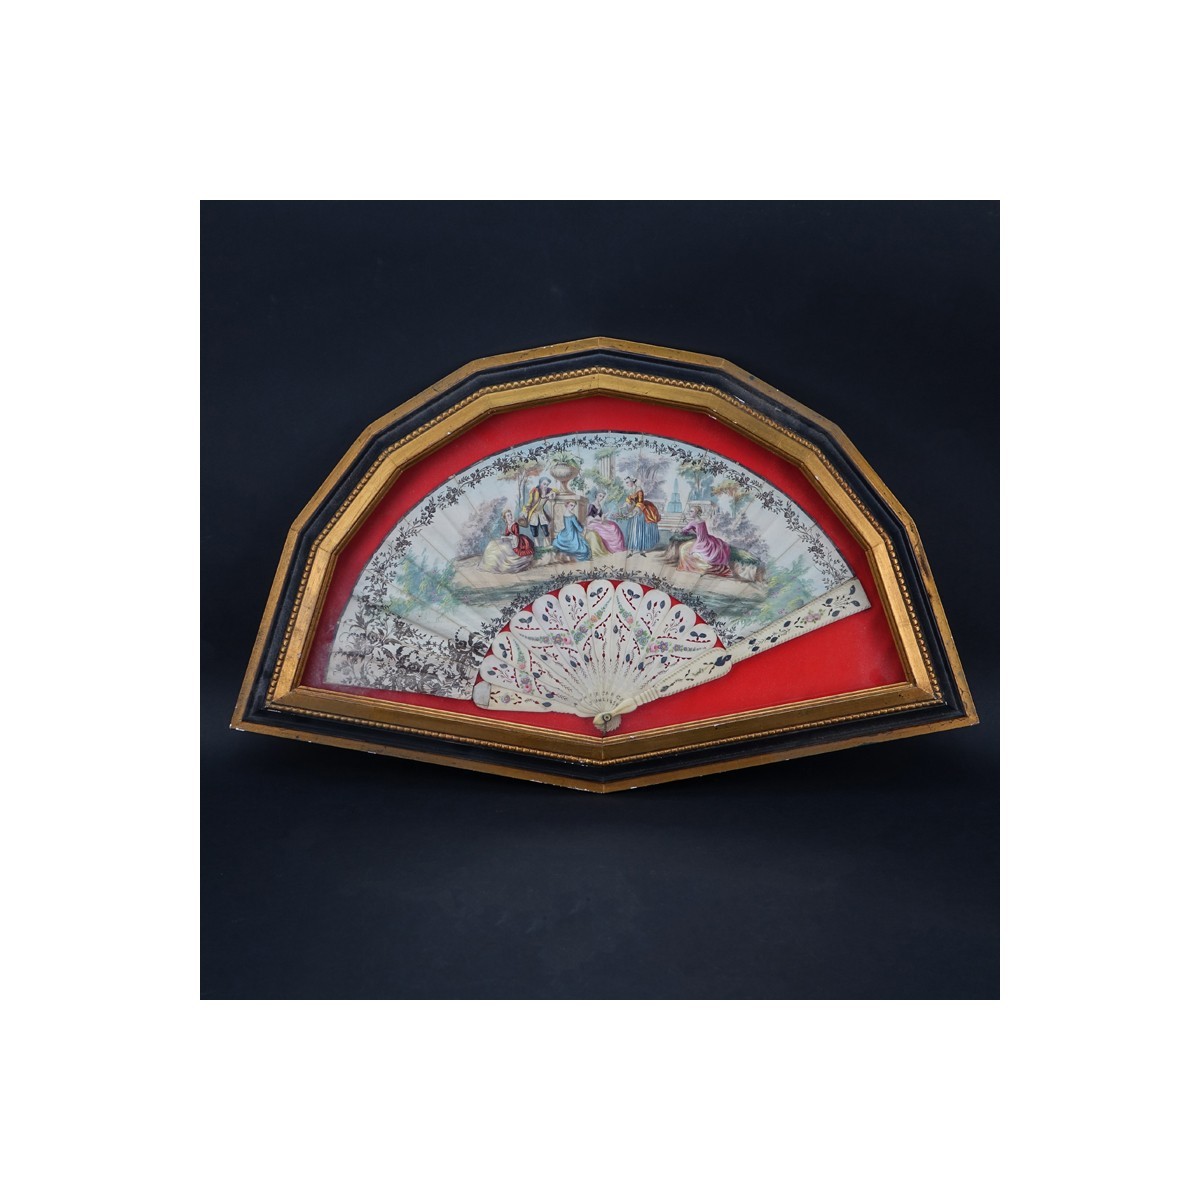 Antique Victorian Hand Painted Silk and Bone Fan Mounted in Shadowbox Frame. Condition consistent with age, some fraying to silk, rubbing.